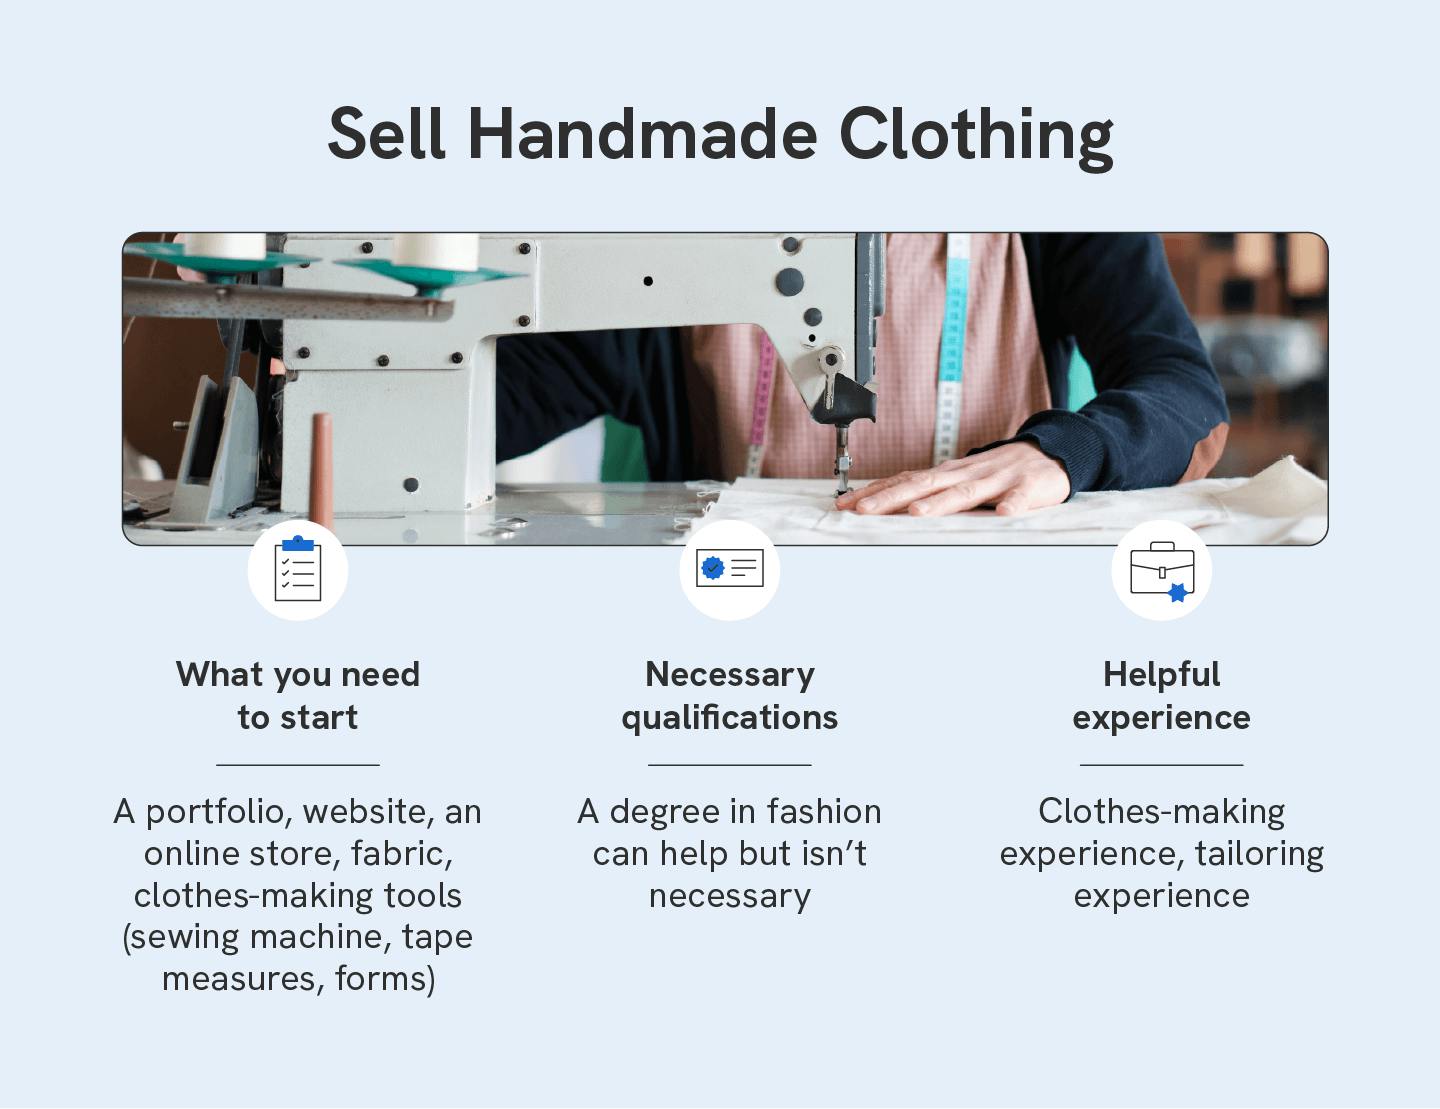 Photograph of a person making clothing with a sewing machine with clipboard, certification, and briefcase icons and text covering what is needed to get started with this small business idea.